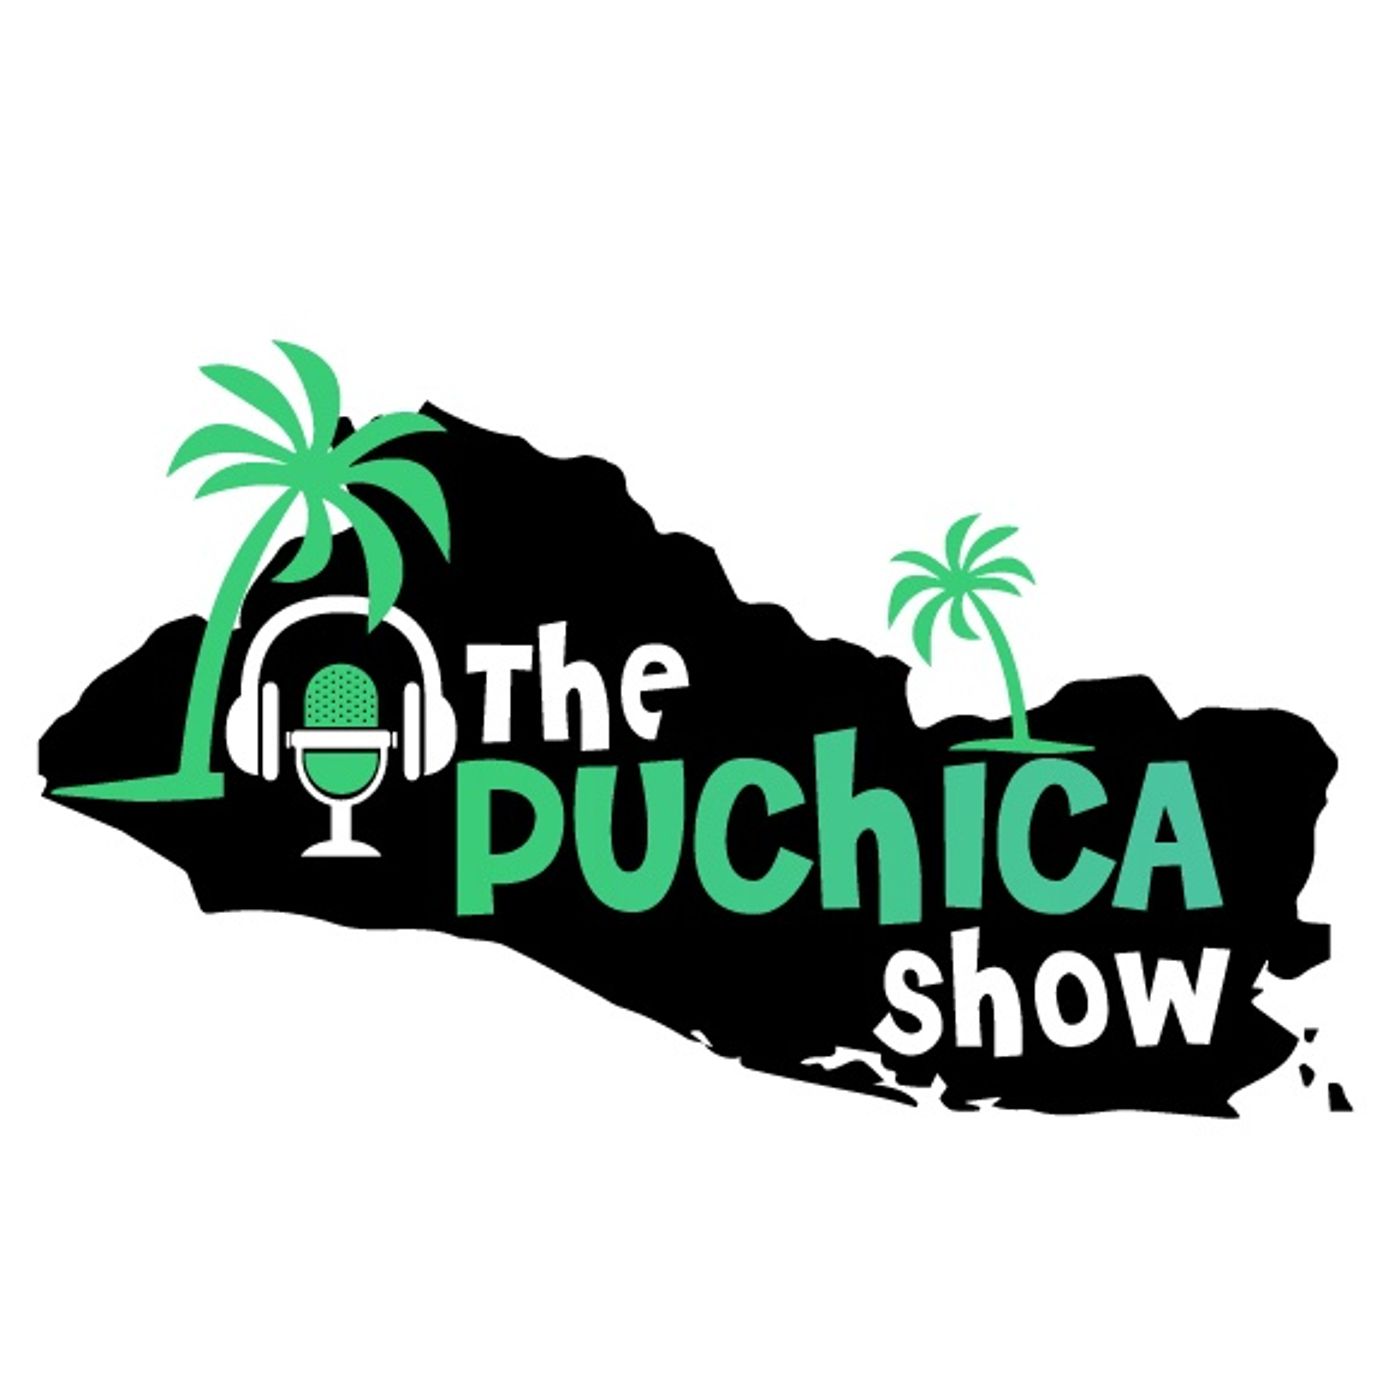 Puchica Ep 40 Remembering Old Games Like Beaves and Butthead, DBZ Goten's Power Theory and More